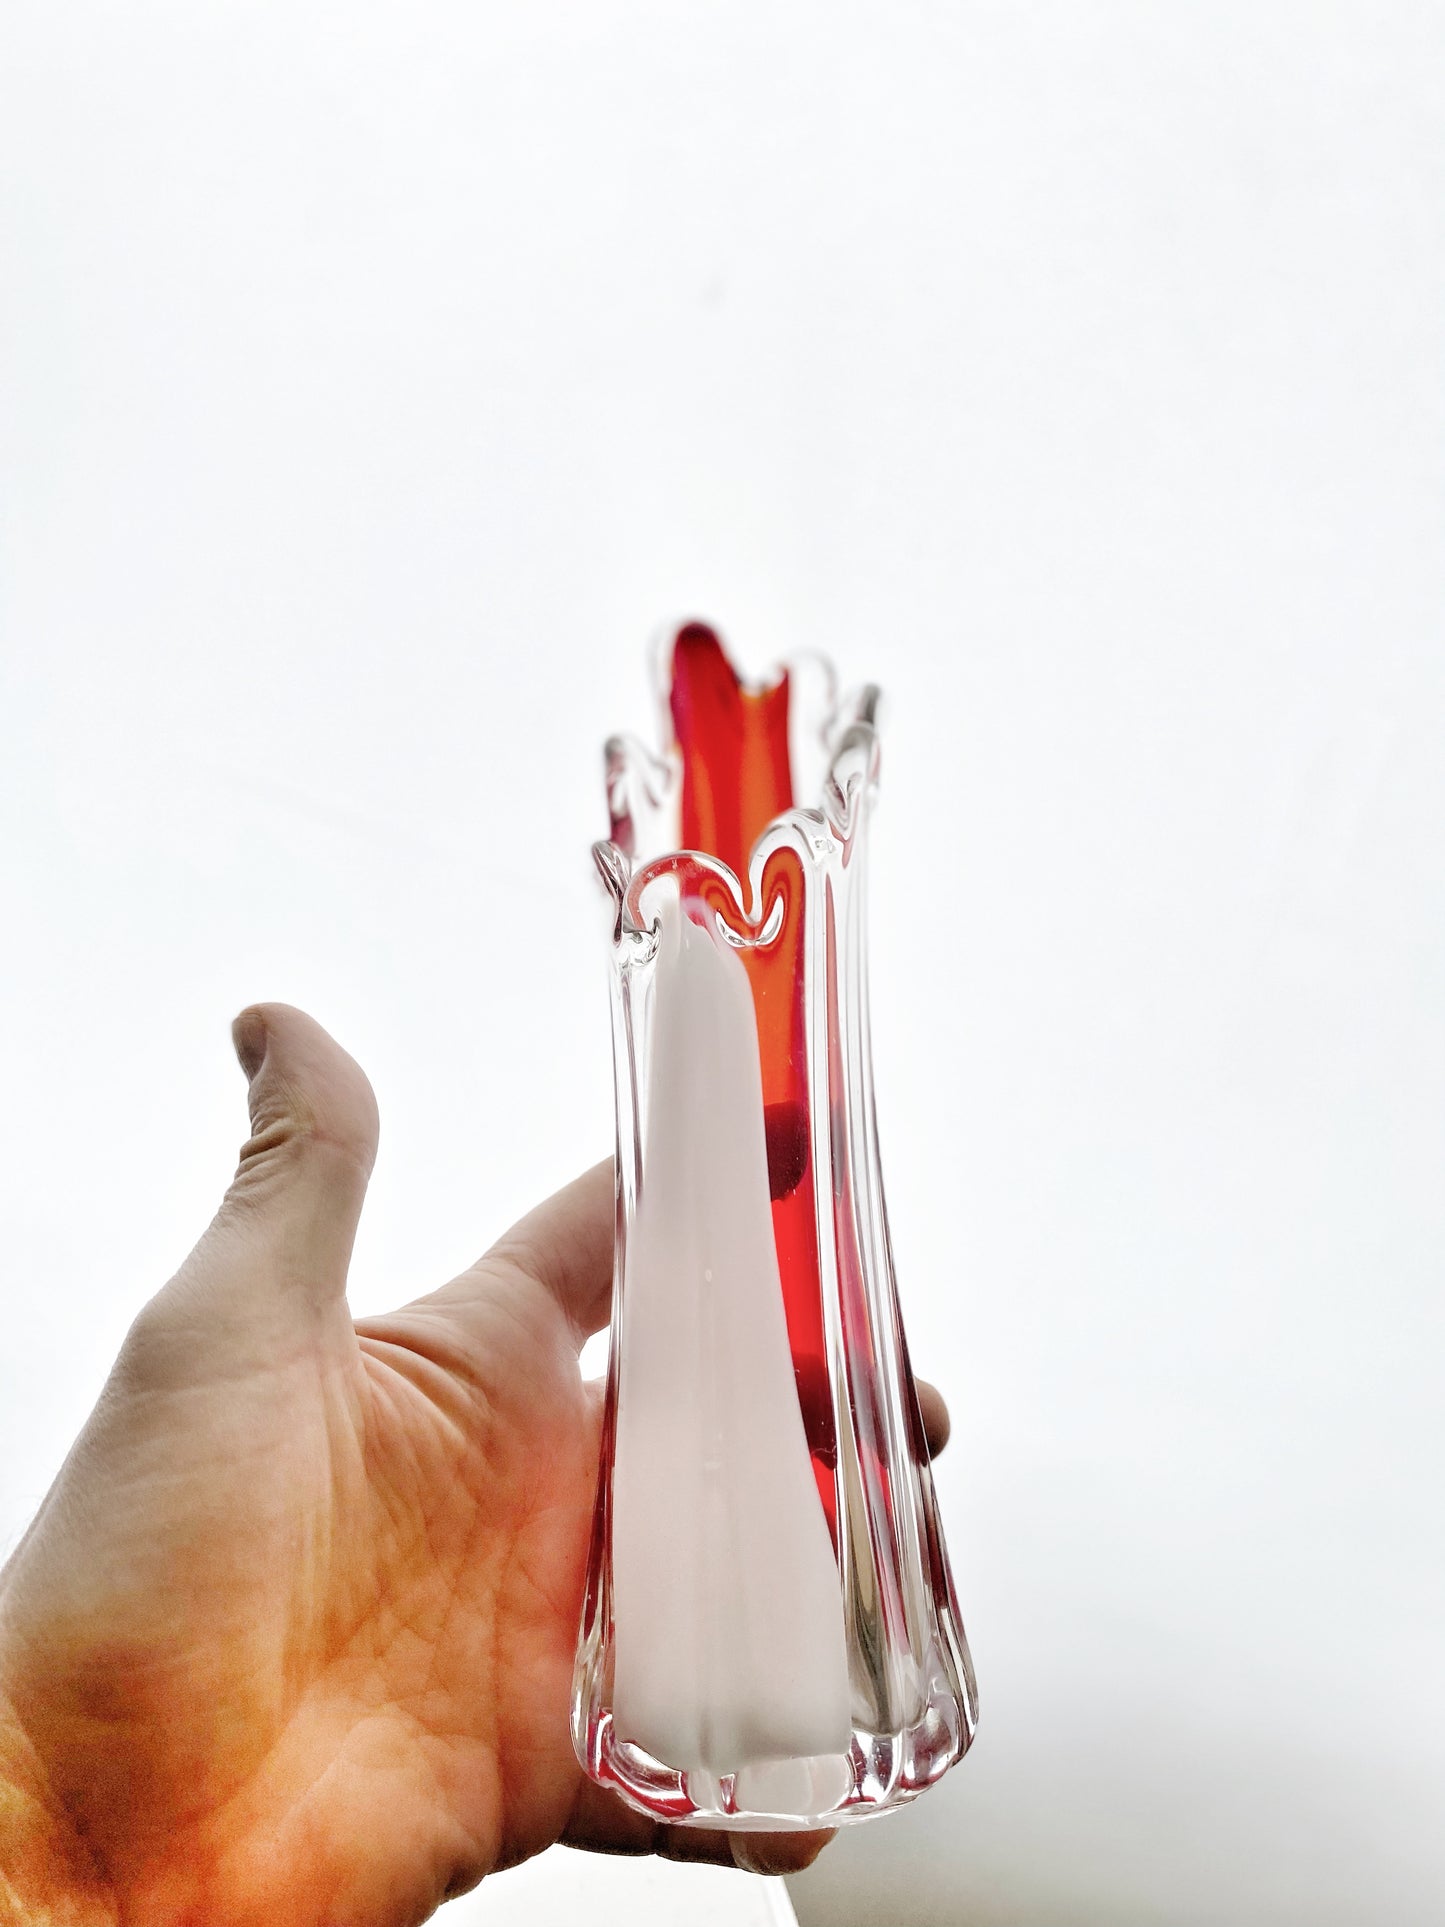 A Murano Art Glass vase, organic form, clear with white, and red tint